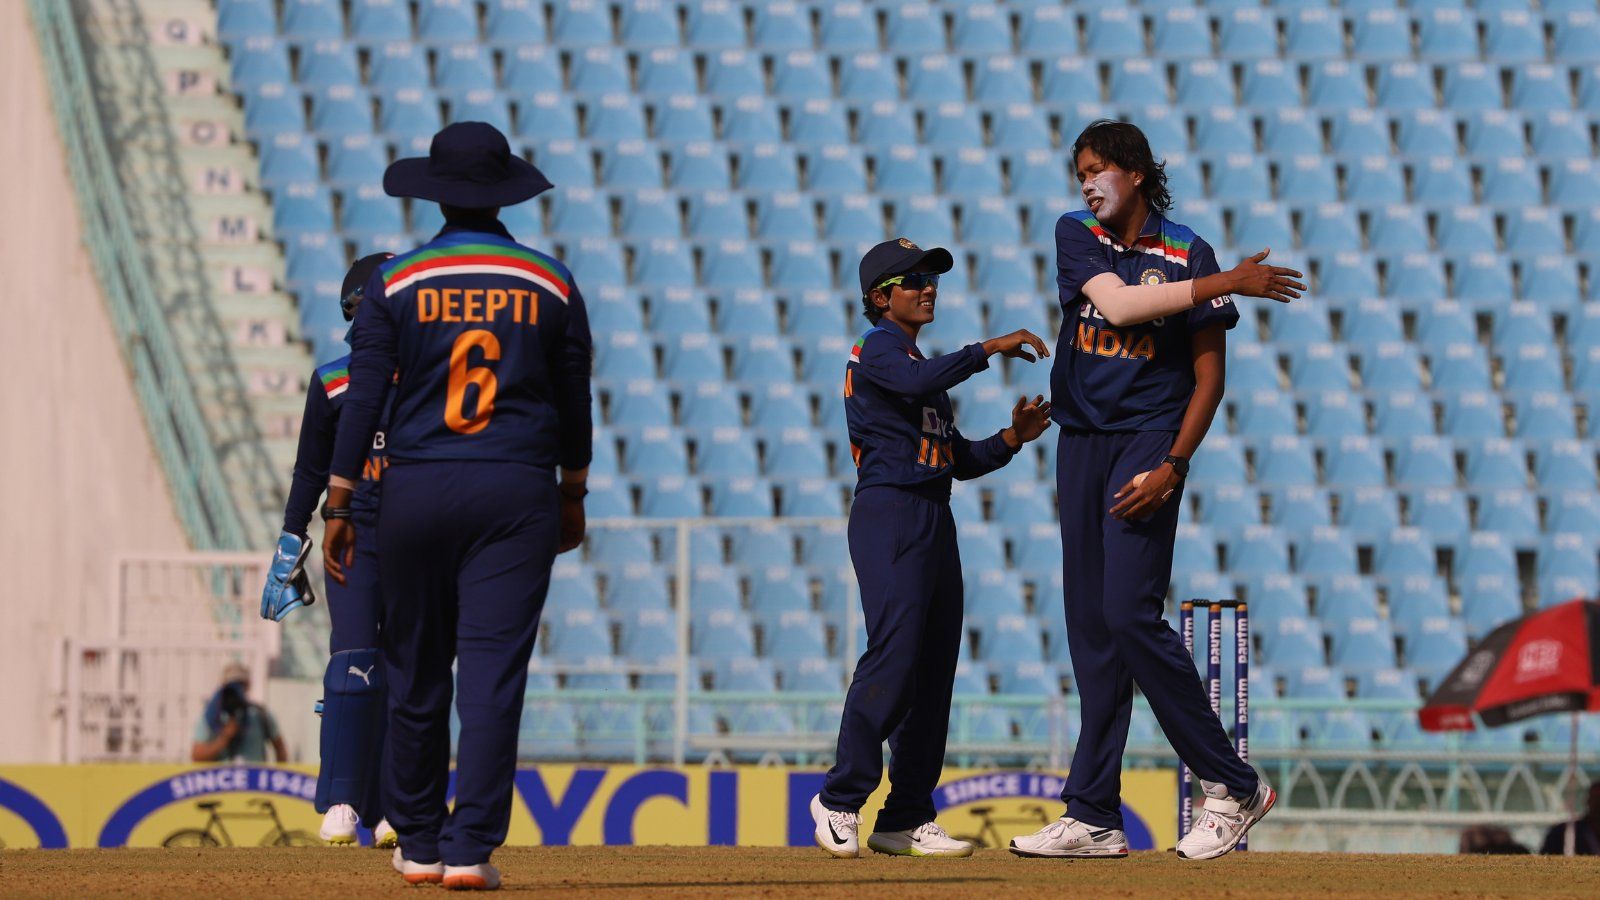 India vs South Africa women’s ODI: Visitors restricted to 157 as Jhulan Goswami snaps 4 wickets